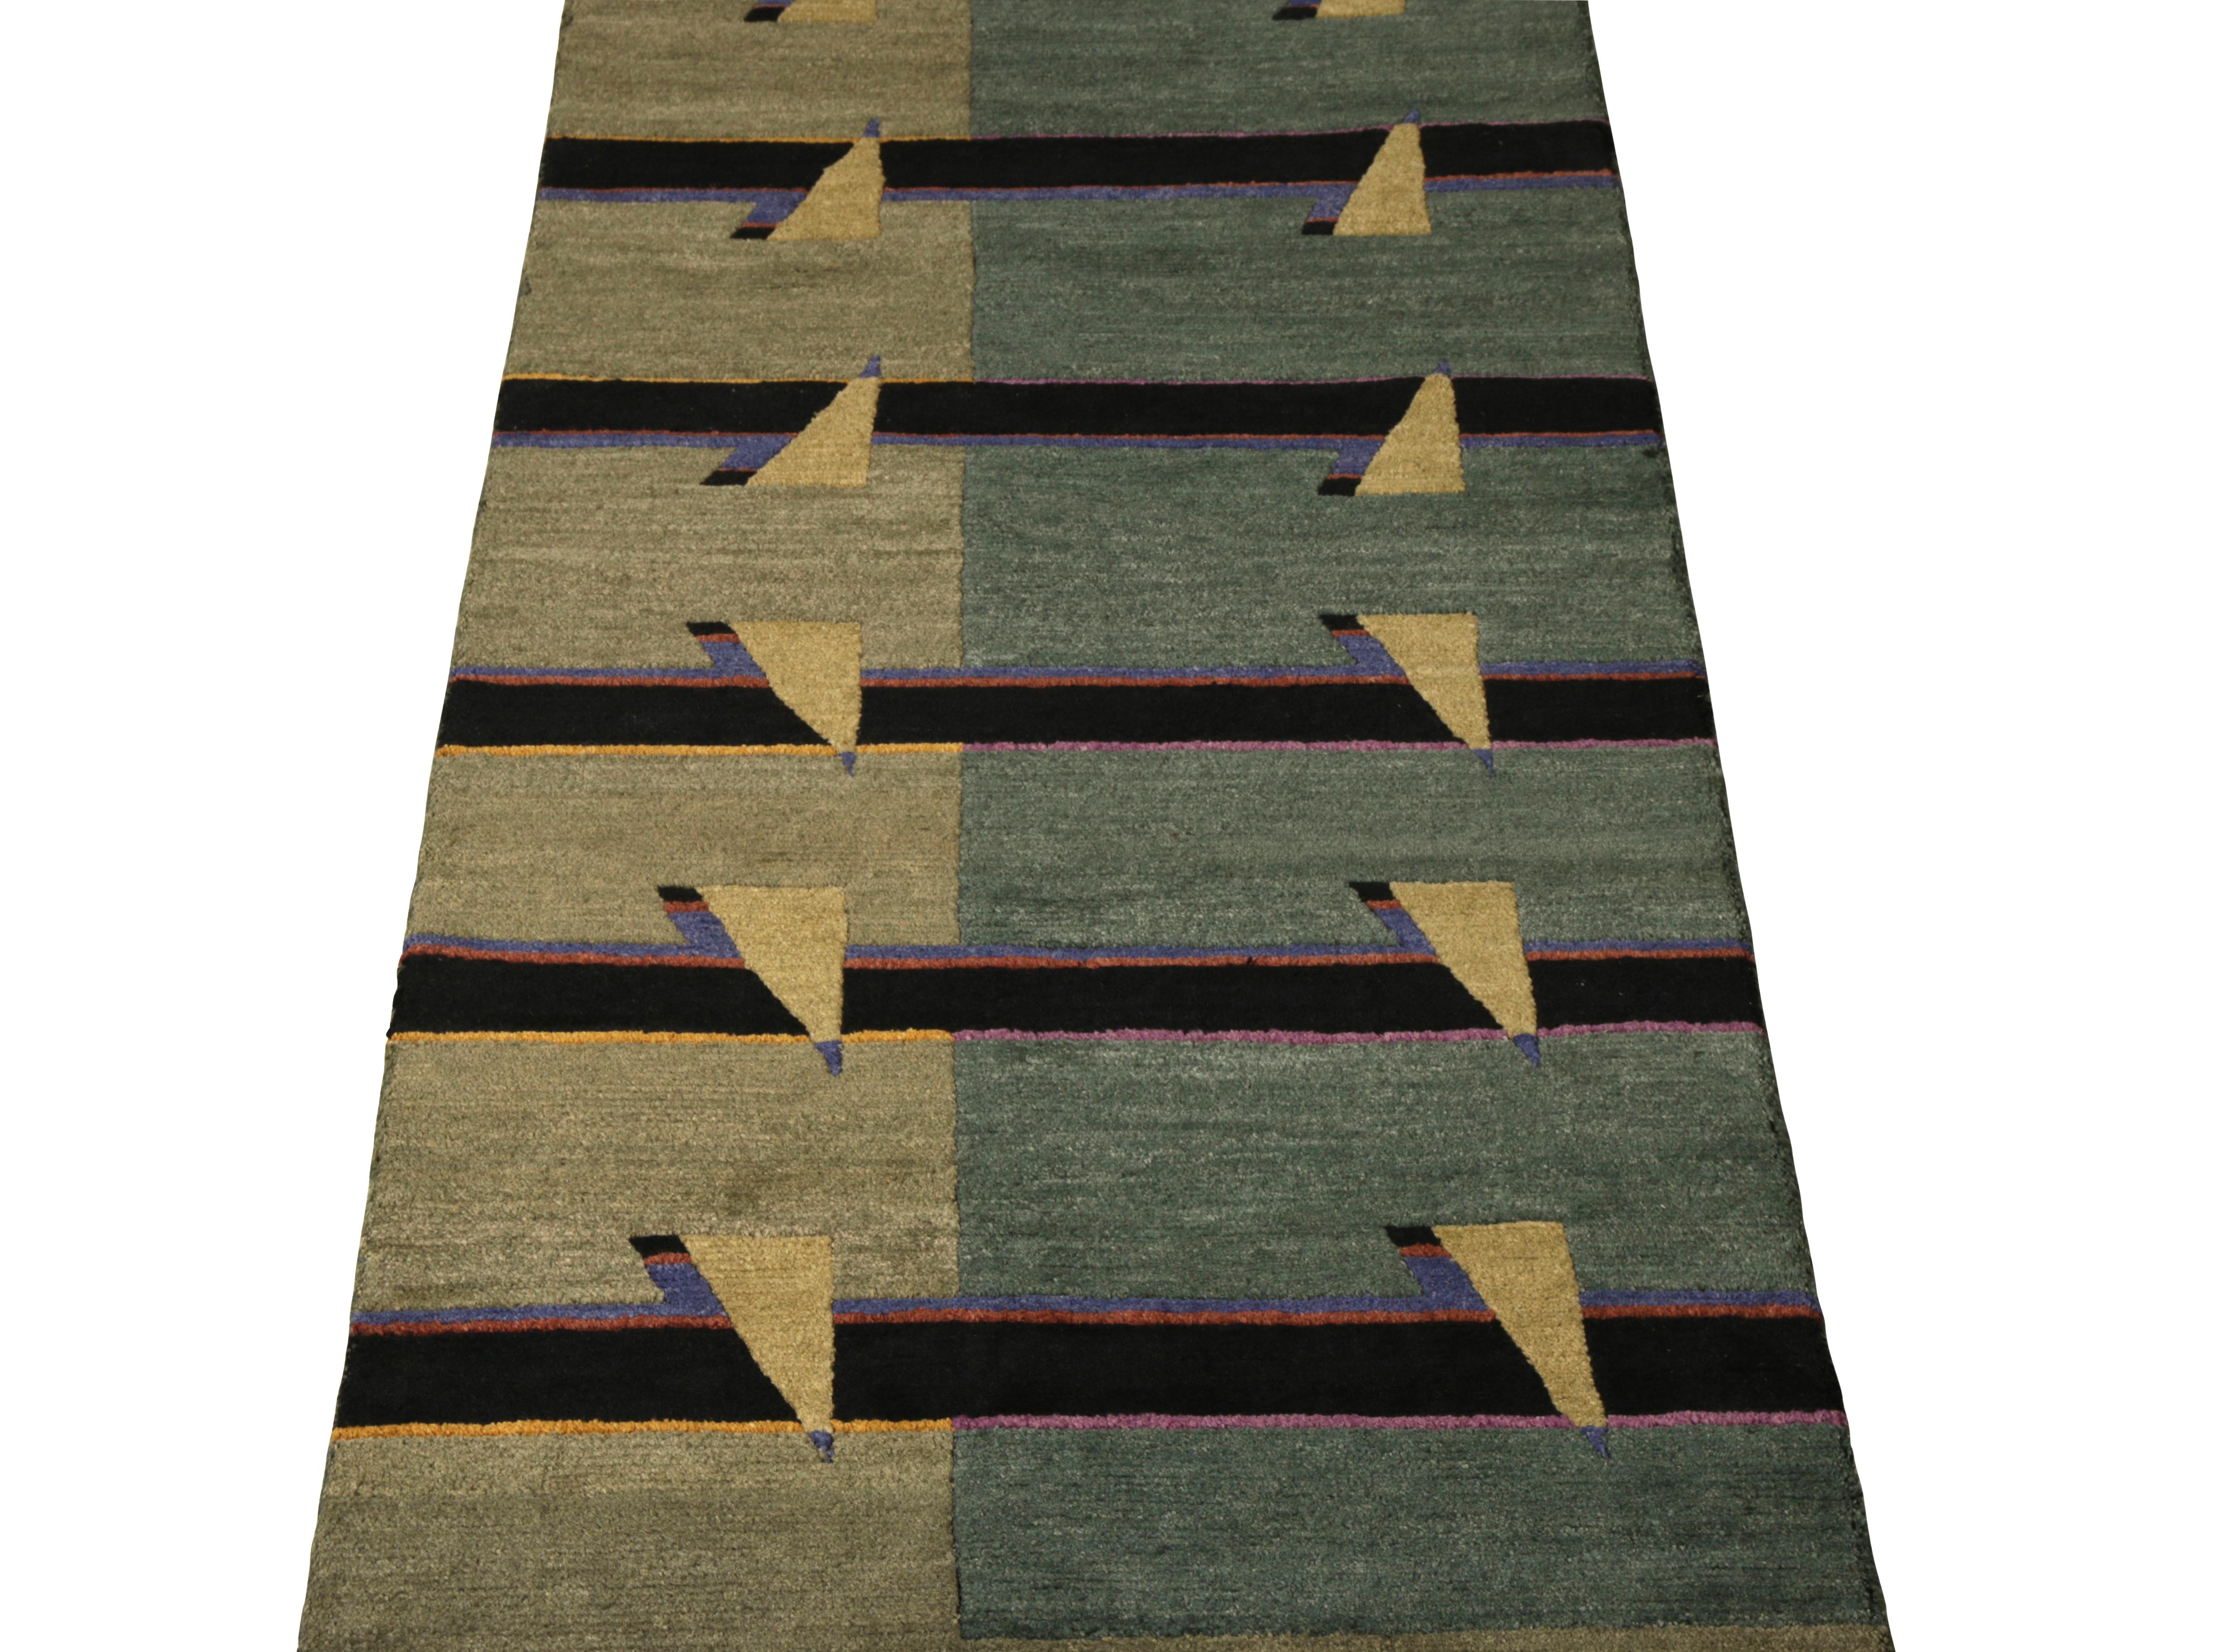 Hand-knotted in wool originating from Rug & Kilim’s New & Modern rug collection, a 3x12 modern runner drawing on cubist design principles in a chic, inviting striped pattern with hues of green, black, and blue lending to the artisan look. 

On the